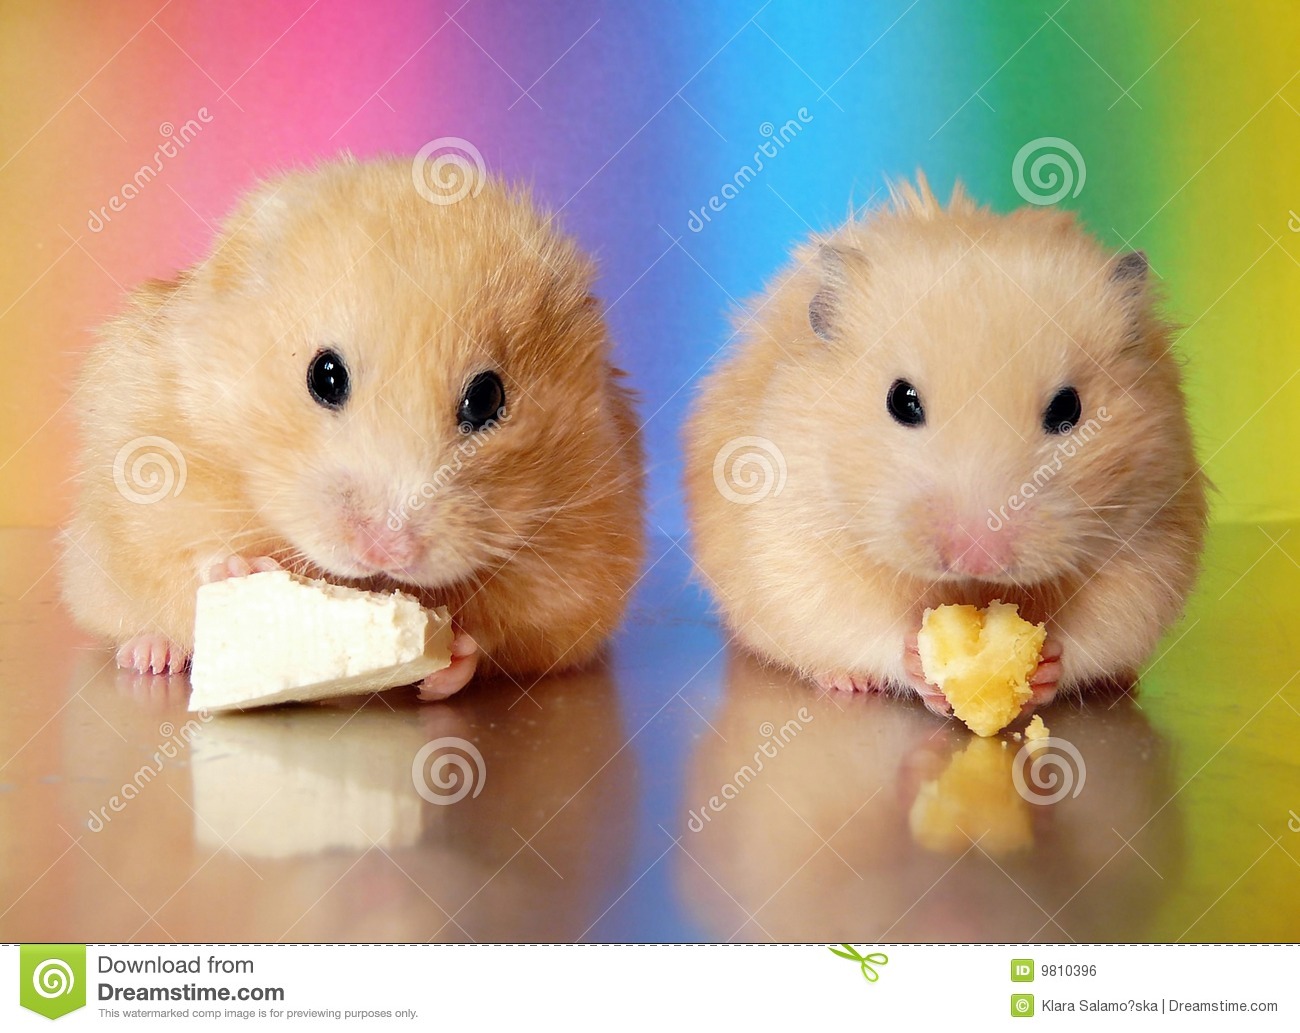 Two Syrian Hamsters Eating Dinner Together Royalty Free Stock Image    